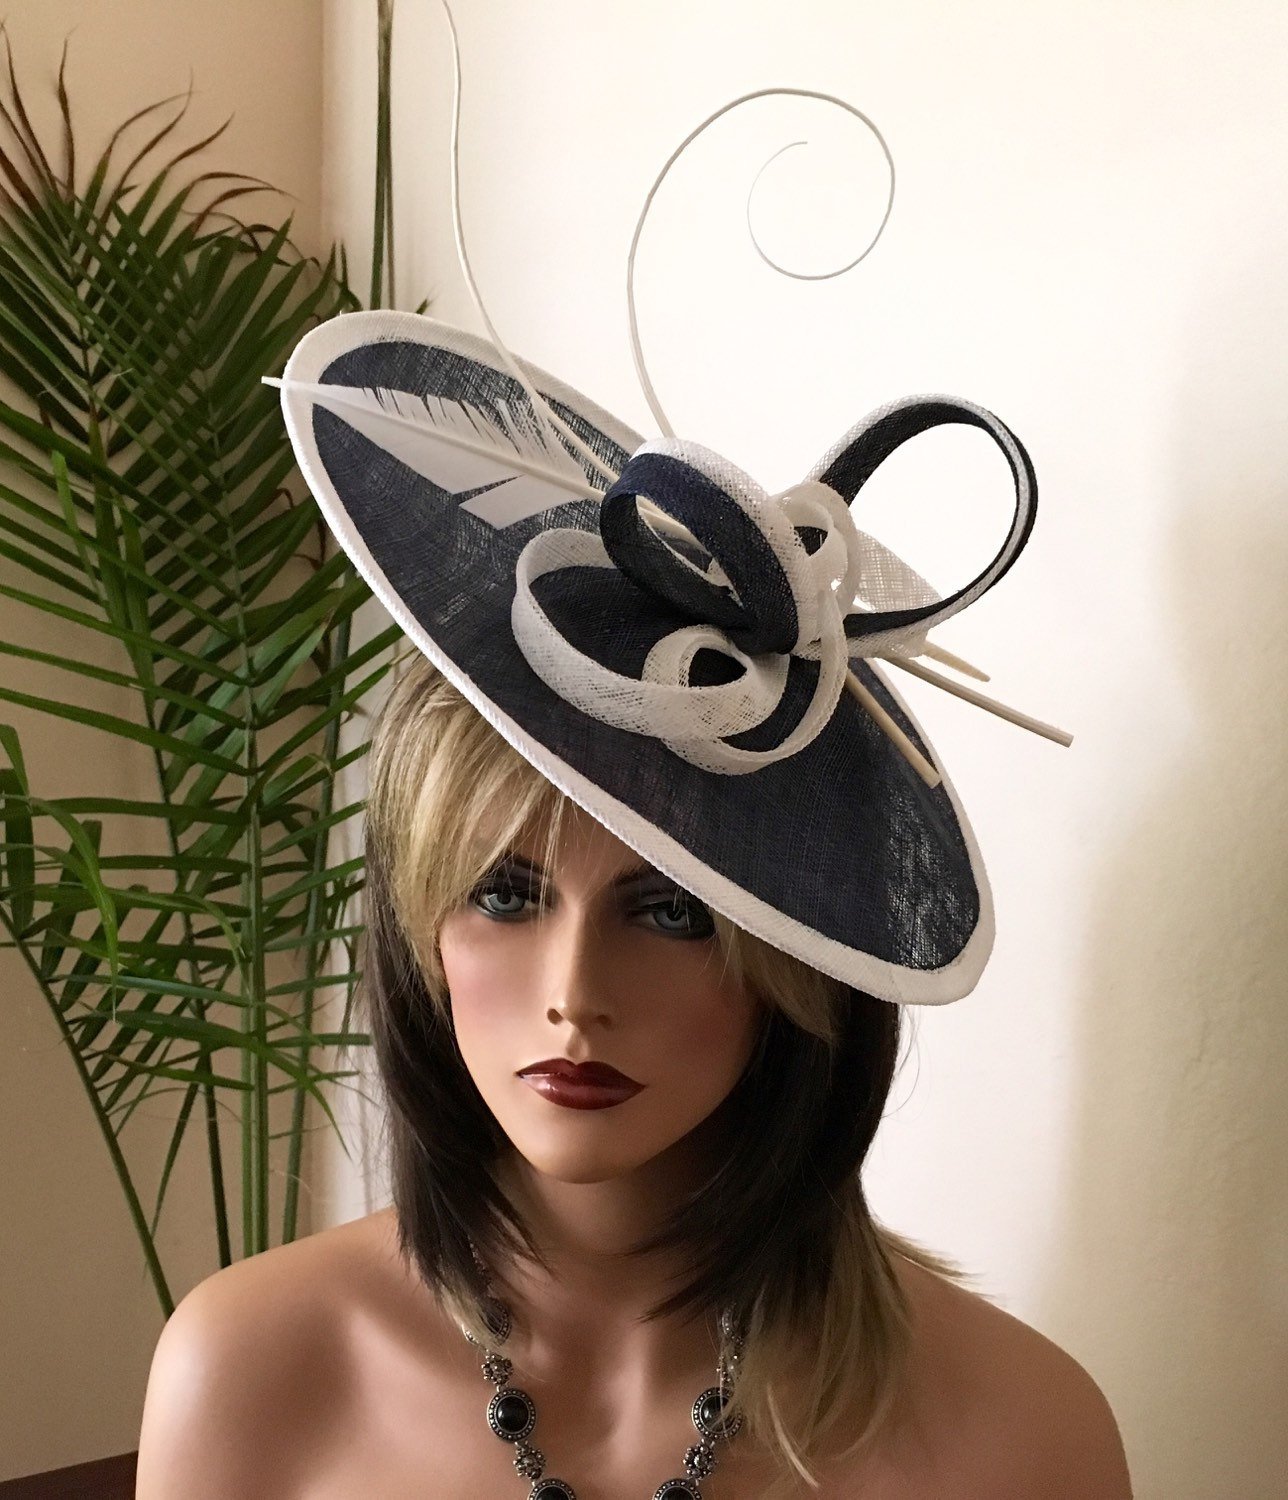 2017 collection.Black and white fascinator. Kentucky Derby hat. Royal Ascot ivory fascinator. Fascinator for church, wedding, races